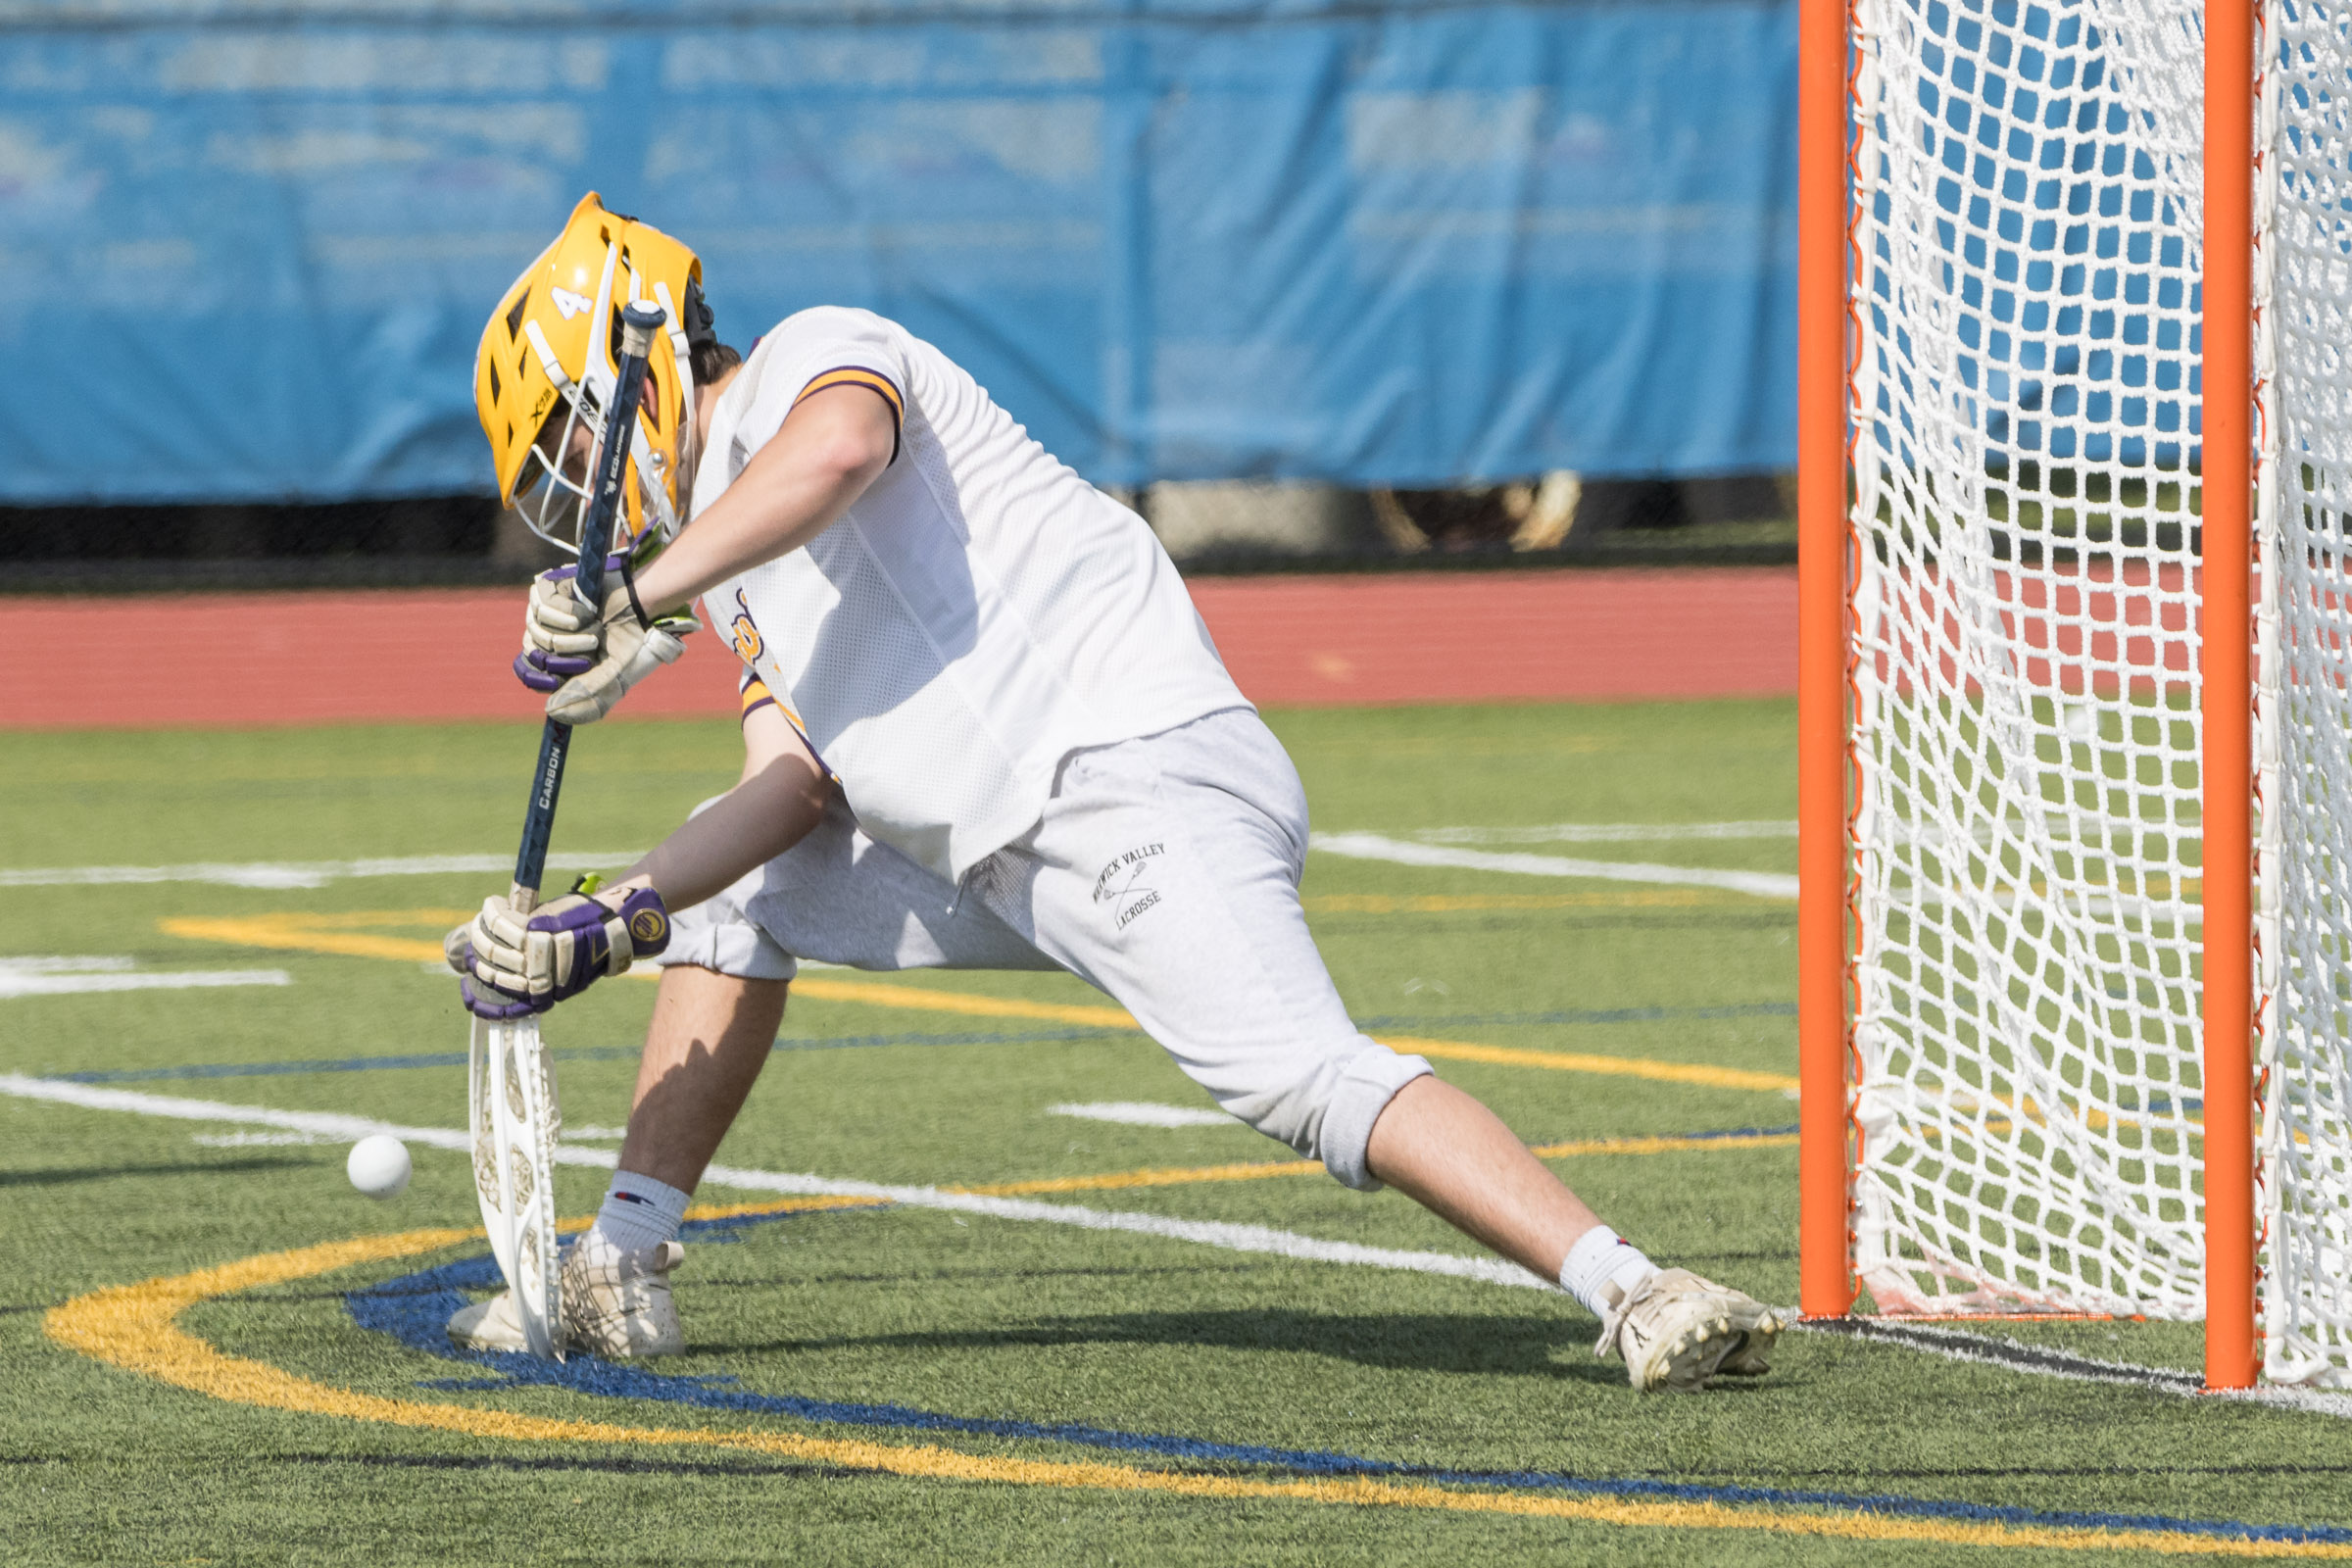 Warwick Valley varsity boys lacrosse goalie makes a save during the Section 9 Class B championship.